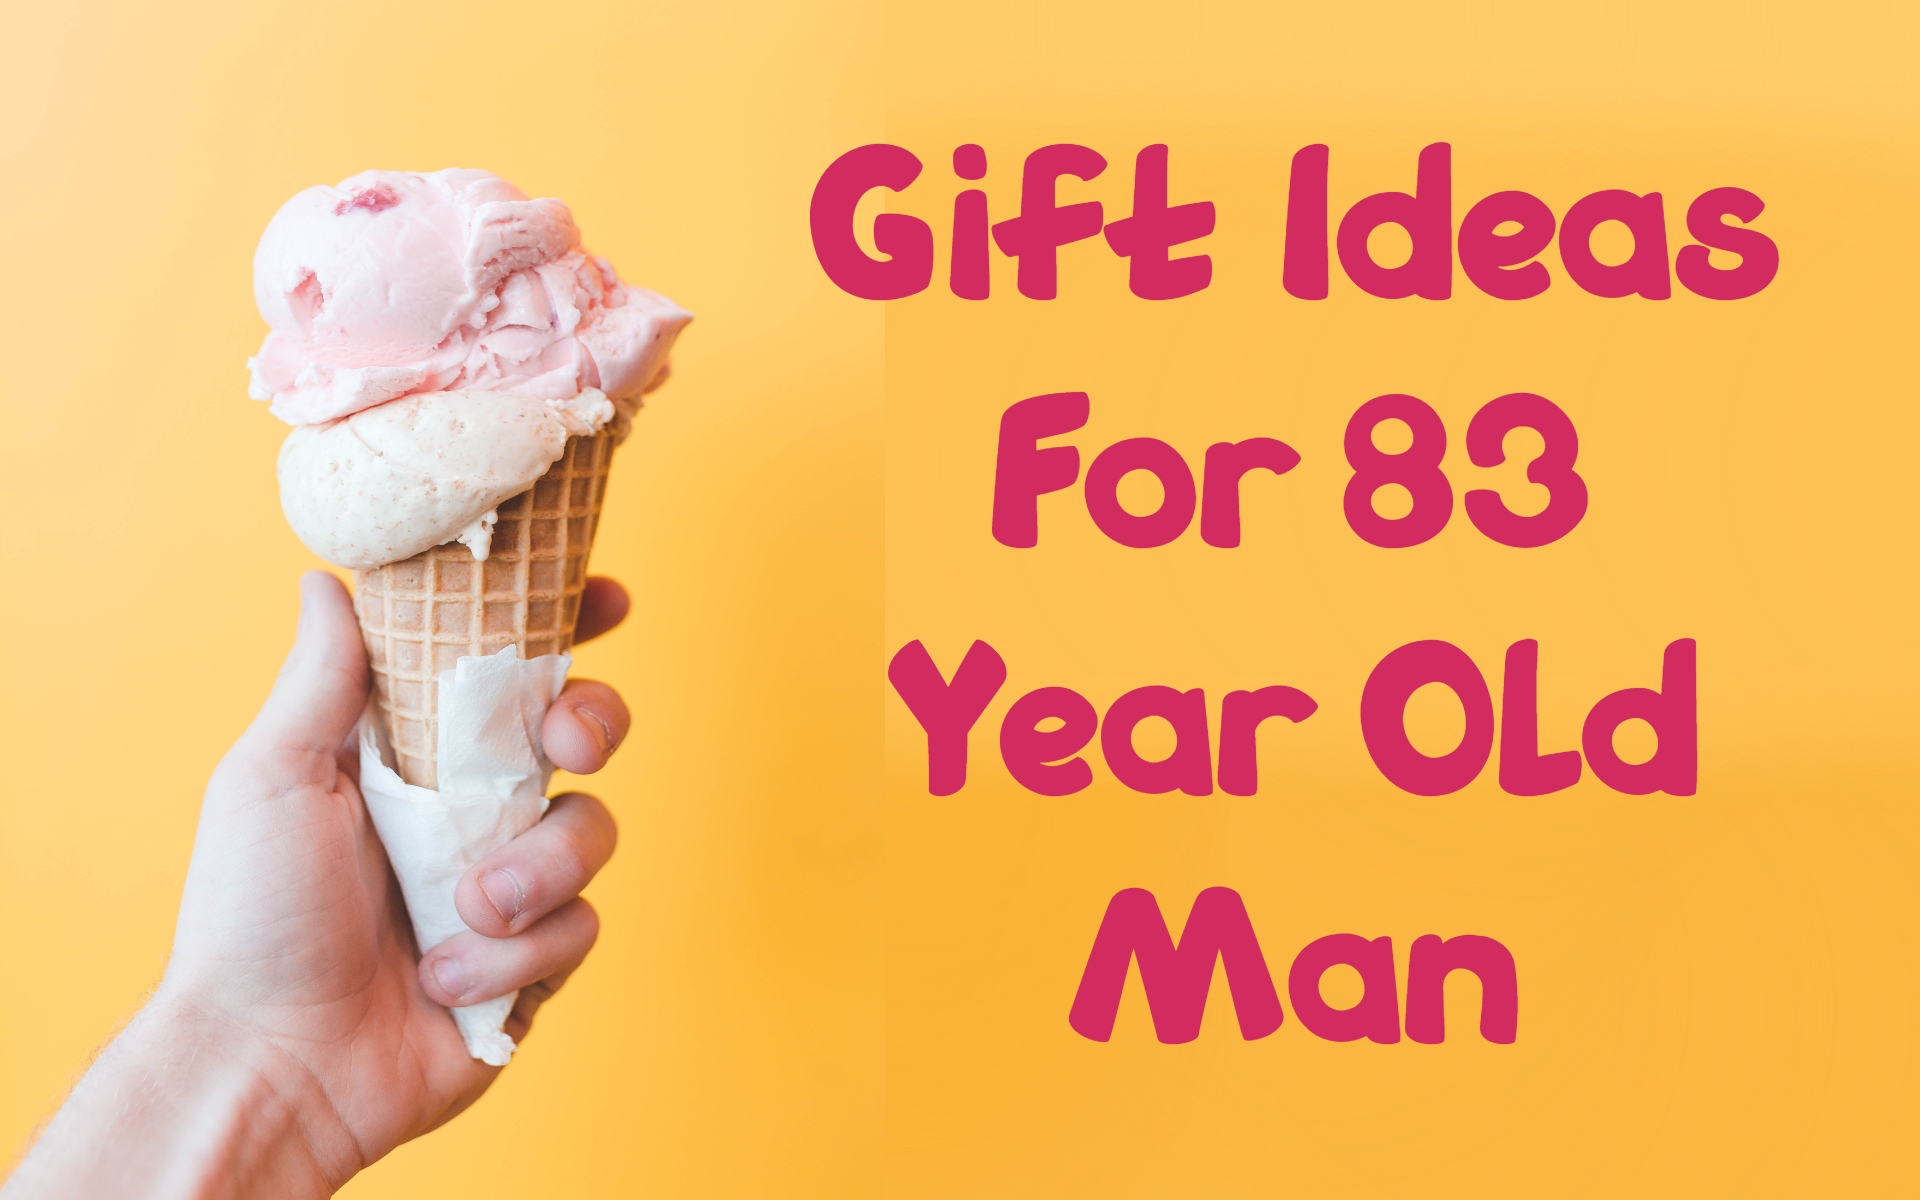 Cover image of gift ideas for 83-year-old man by Giftsedge